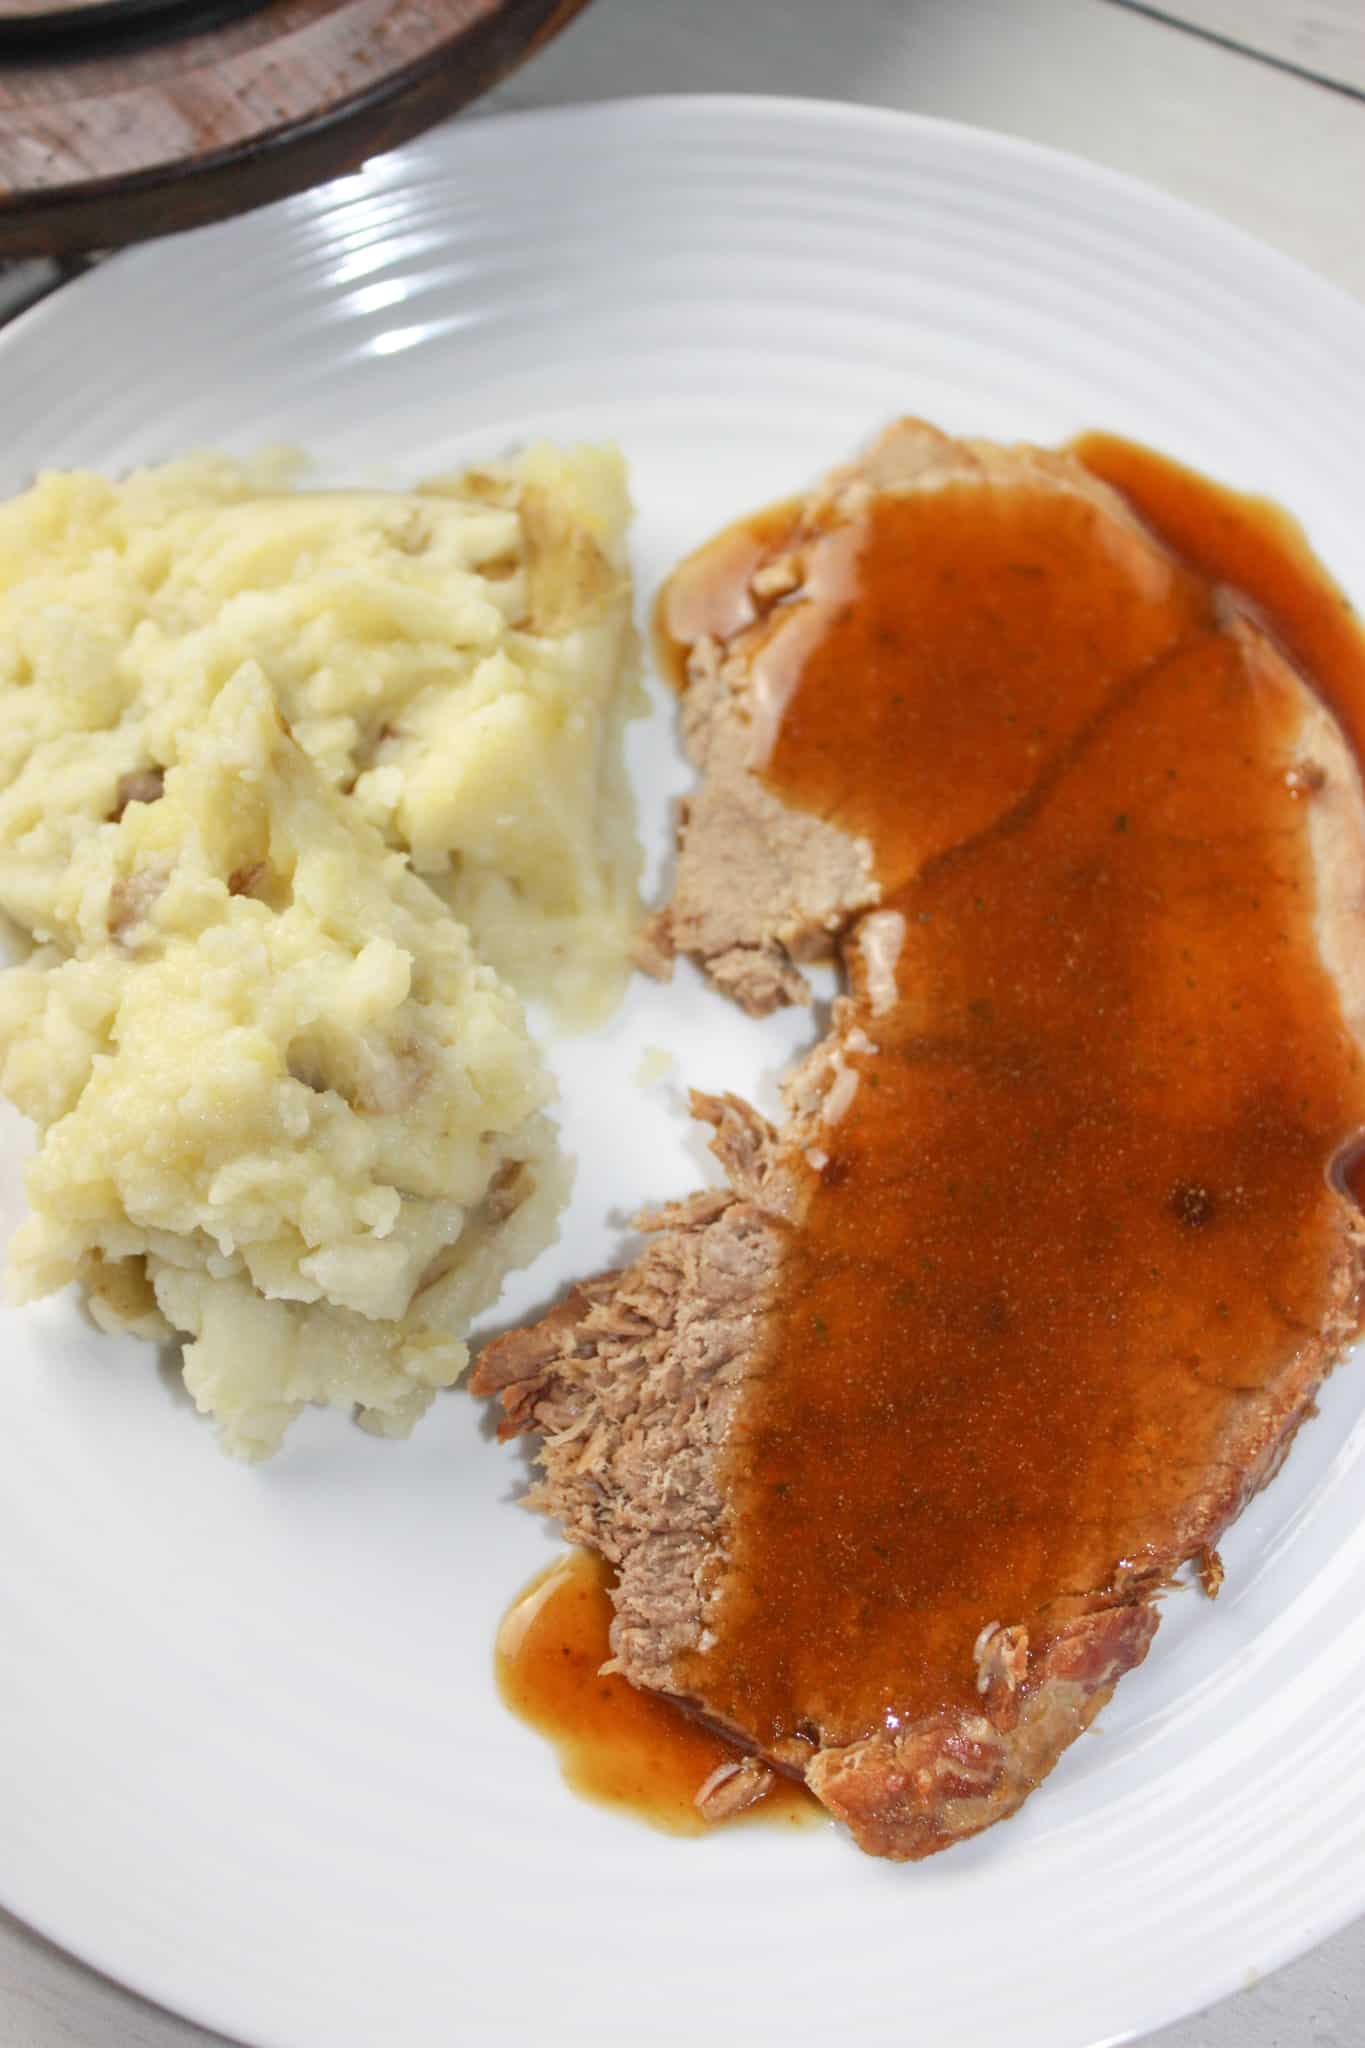 Instant Pot Beef Round Roast with Gravy takes a tougher cut of beef and turns it into a moist and tender main course.  This pressure cooker recipe makes it easy to serve up Sunday Dinner any day of the week!